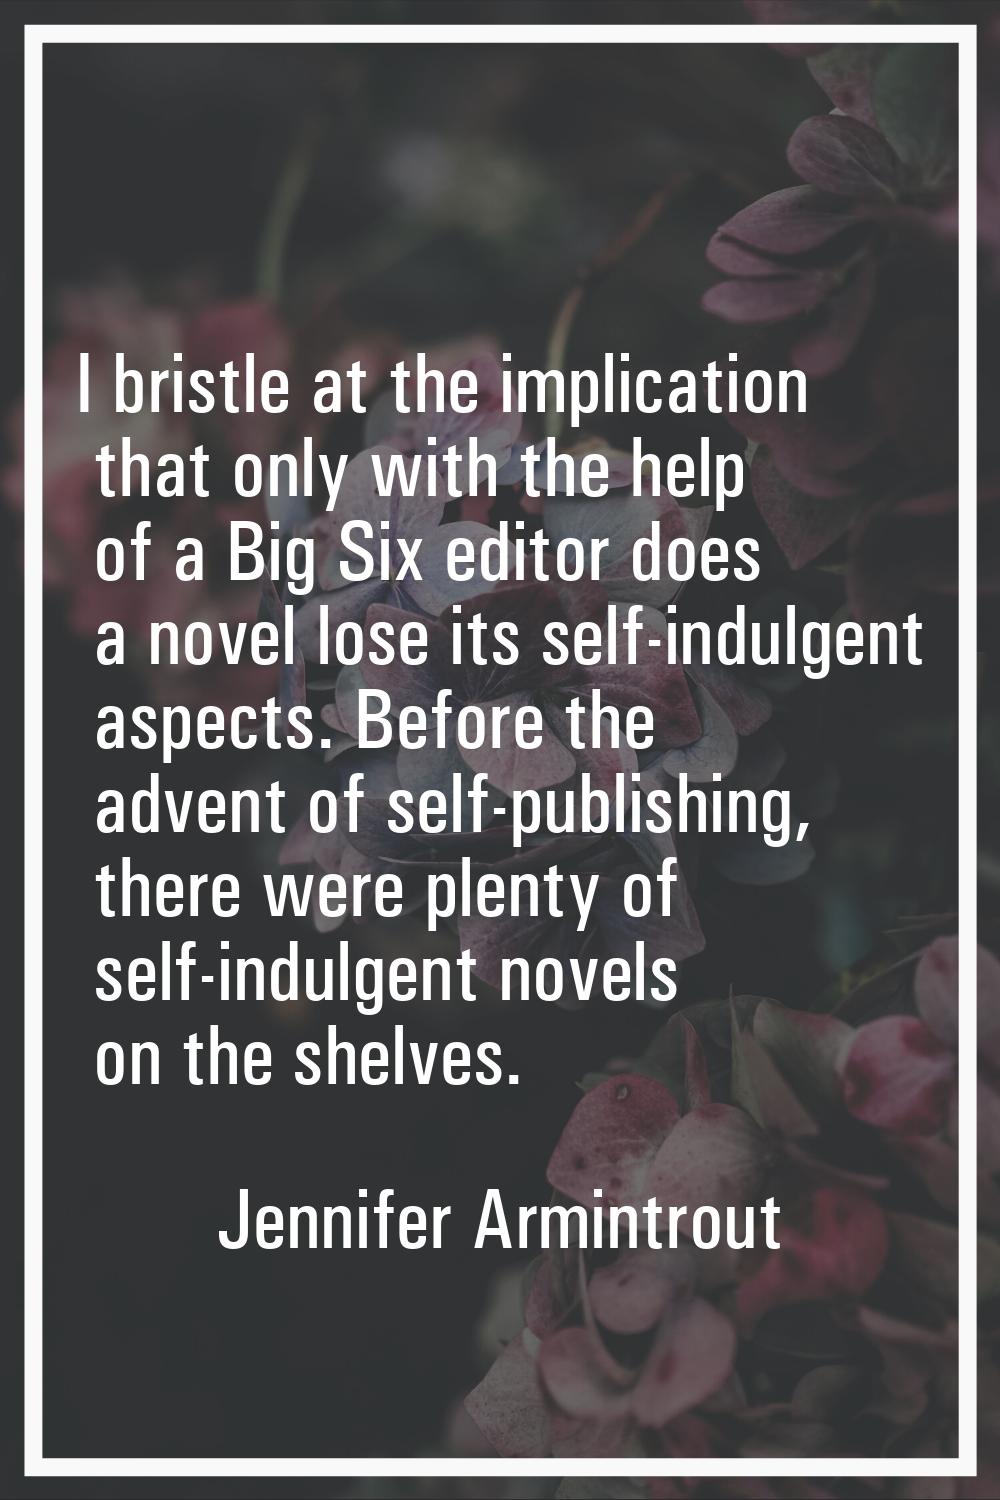 I bristle at the implication that only with the help of a Big Six editor does a novel lose its self